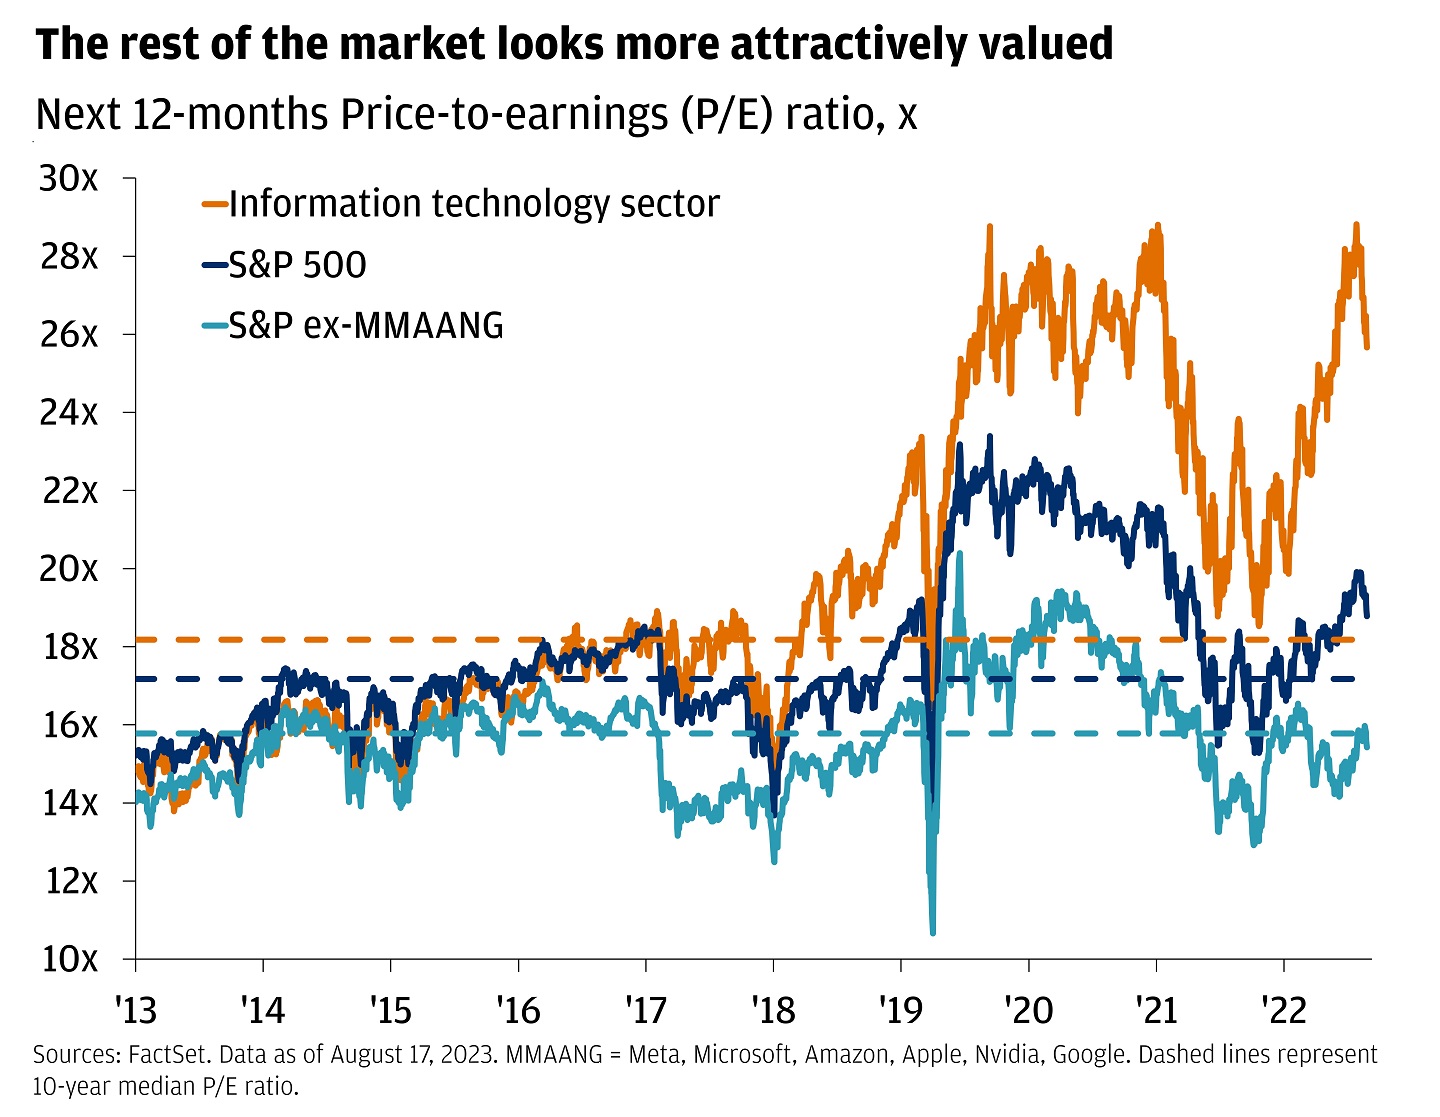 This line chart shows the Information technology sector, the S&P 500 and the S&P ex-MMAANG’s next twelve-month price-to-earnings (P/E) ratio expectations, with data starting in 2013 and going to 2023.